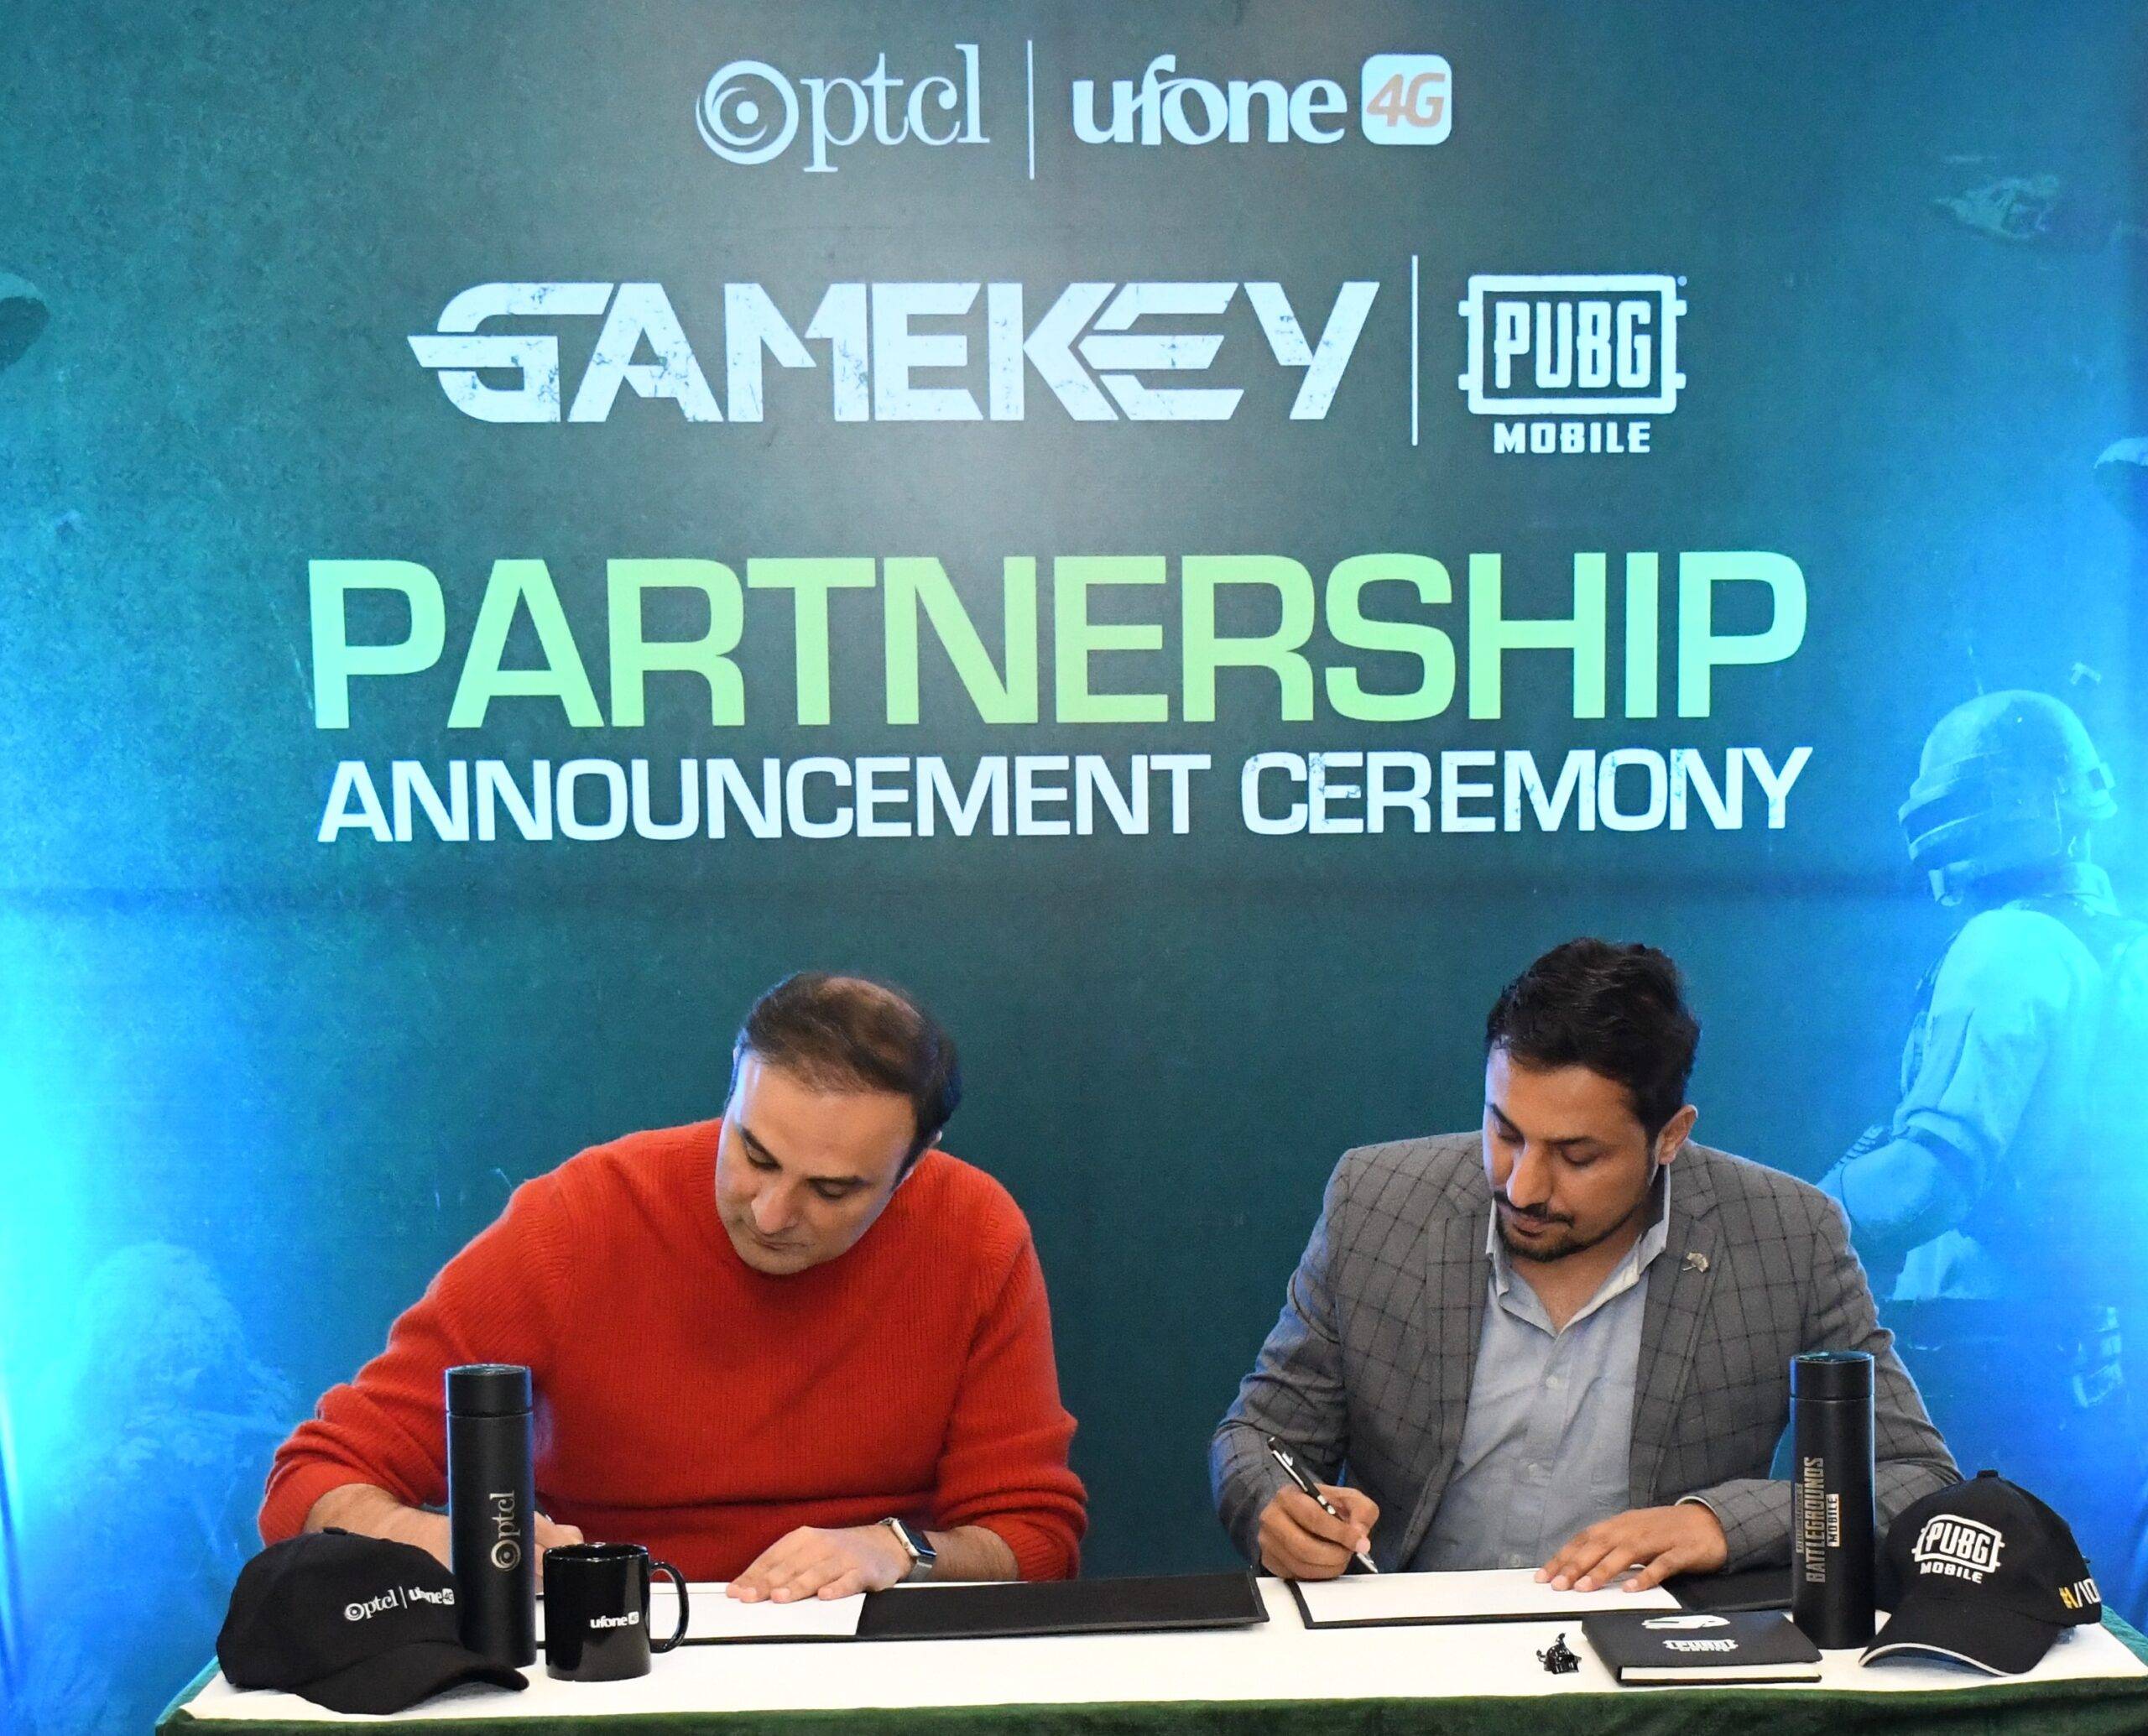 PTCL Group,PUBG MOBILE announce partnership for collaborative gaming activities